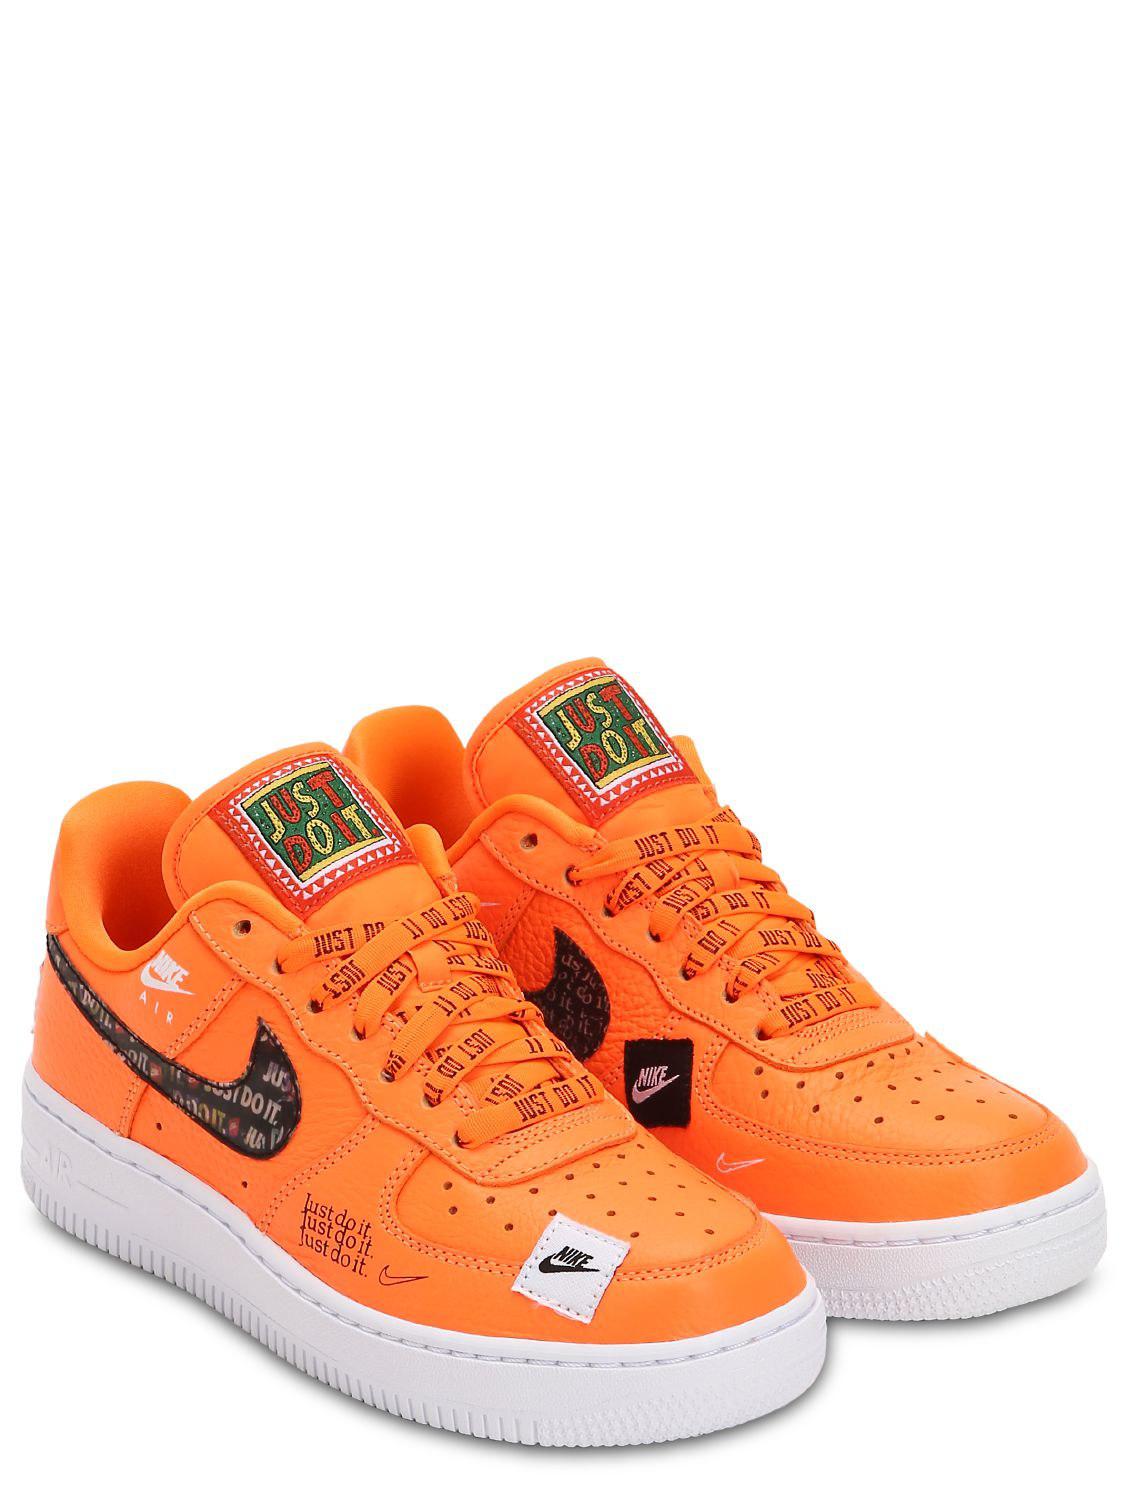 Orange Nike Shoes Air Force - Airforce Military